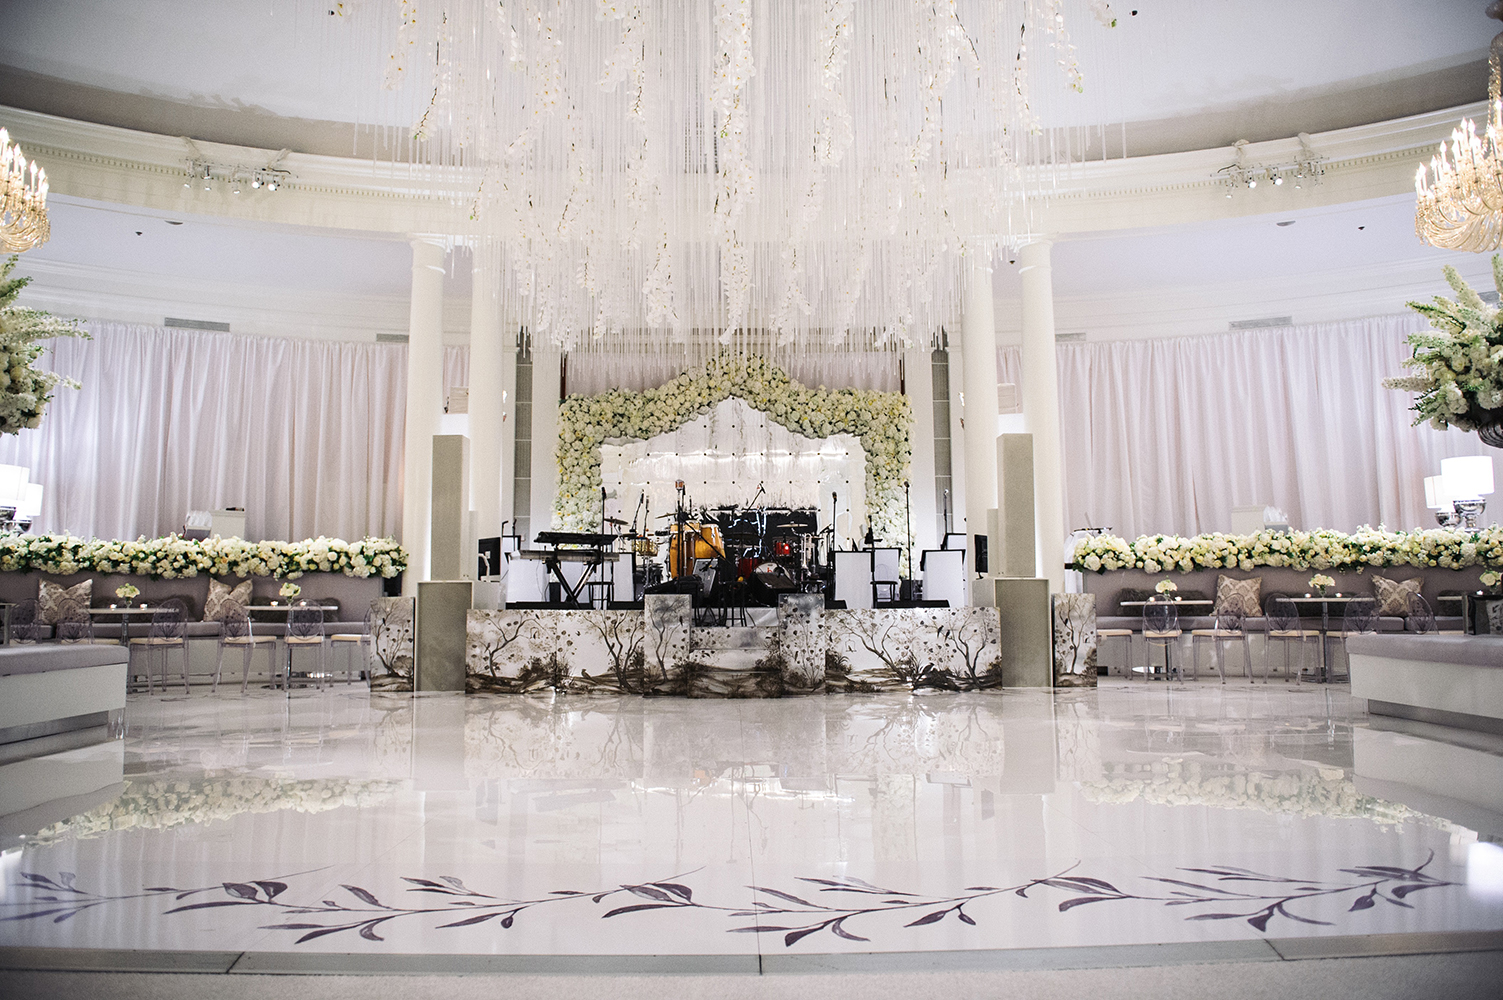 Todd Events is a Florists, Decor, Rentals & Event Designer in Houston, TX